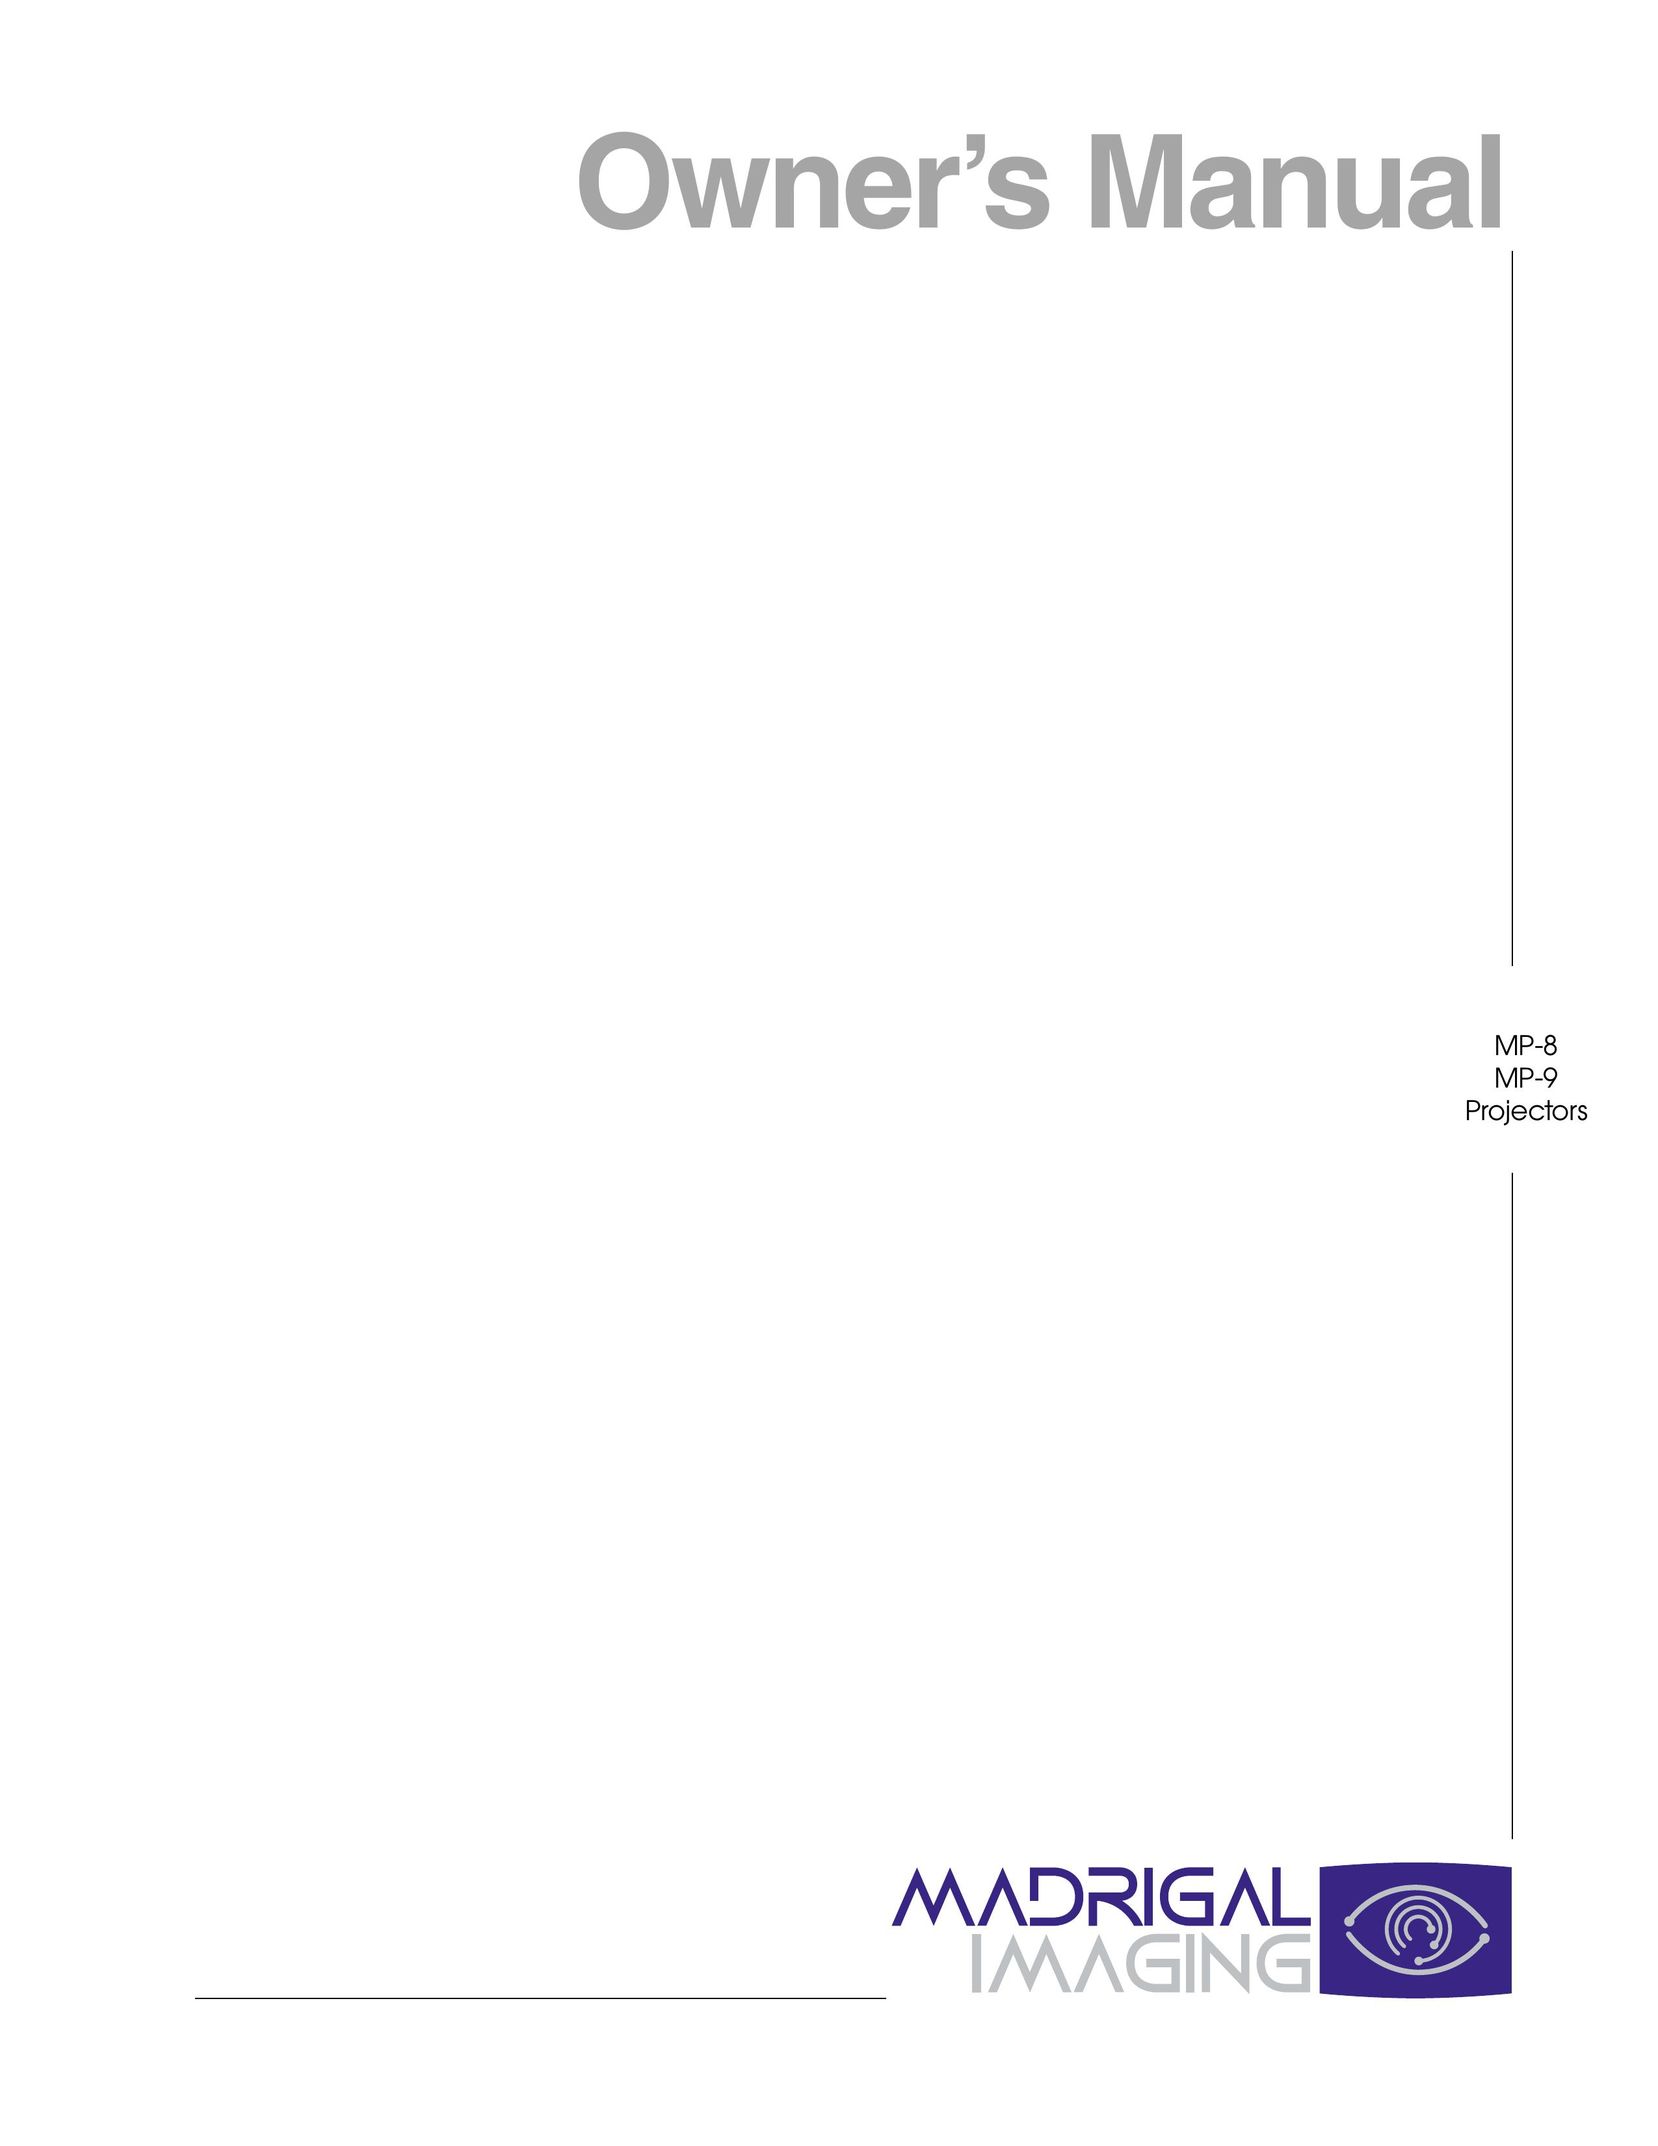 Madrigal Imaging MP-8, MP-9 Projector User Manual